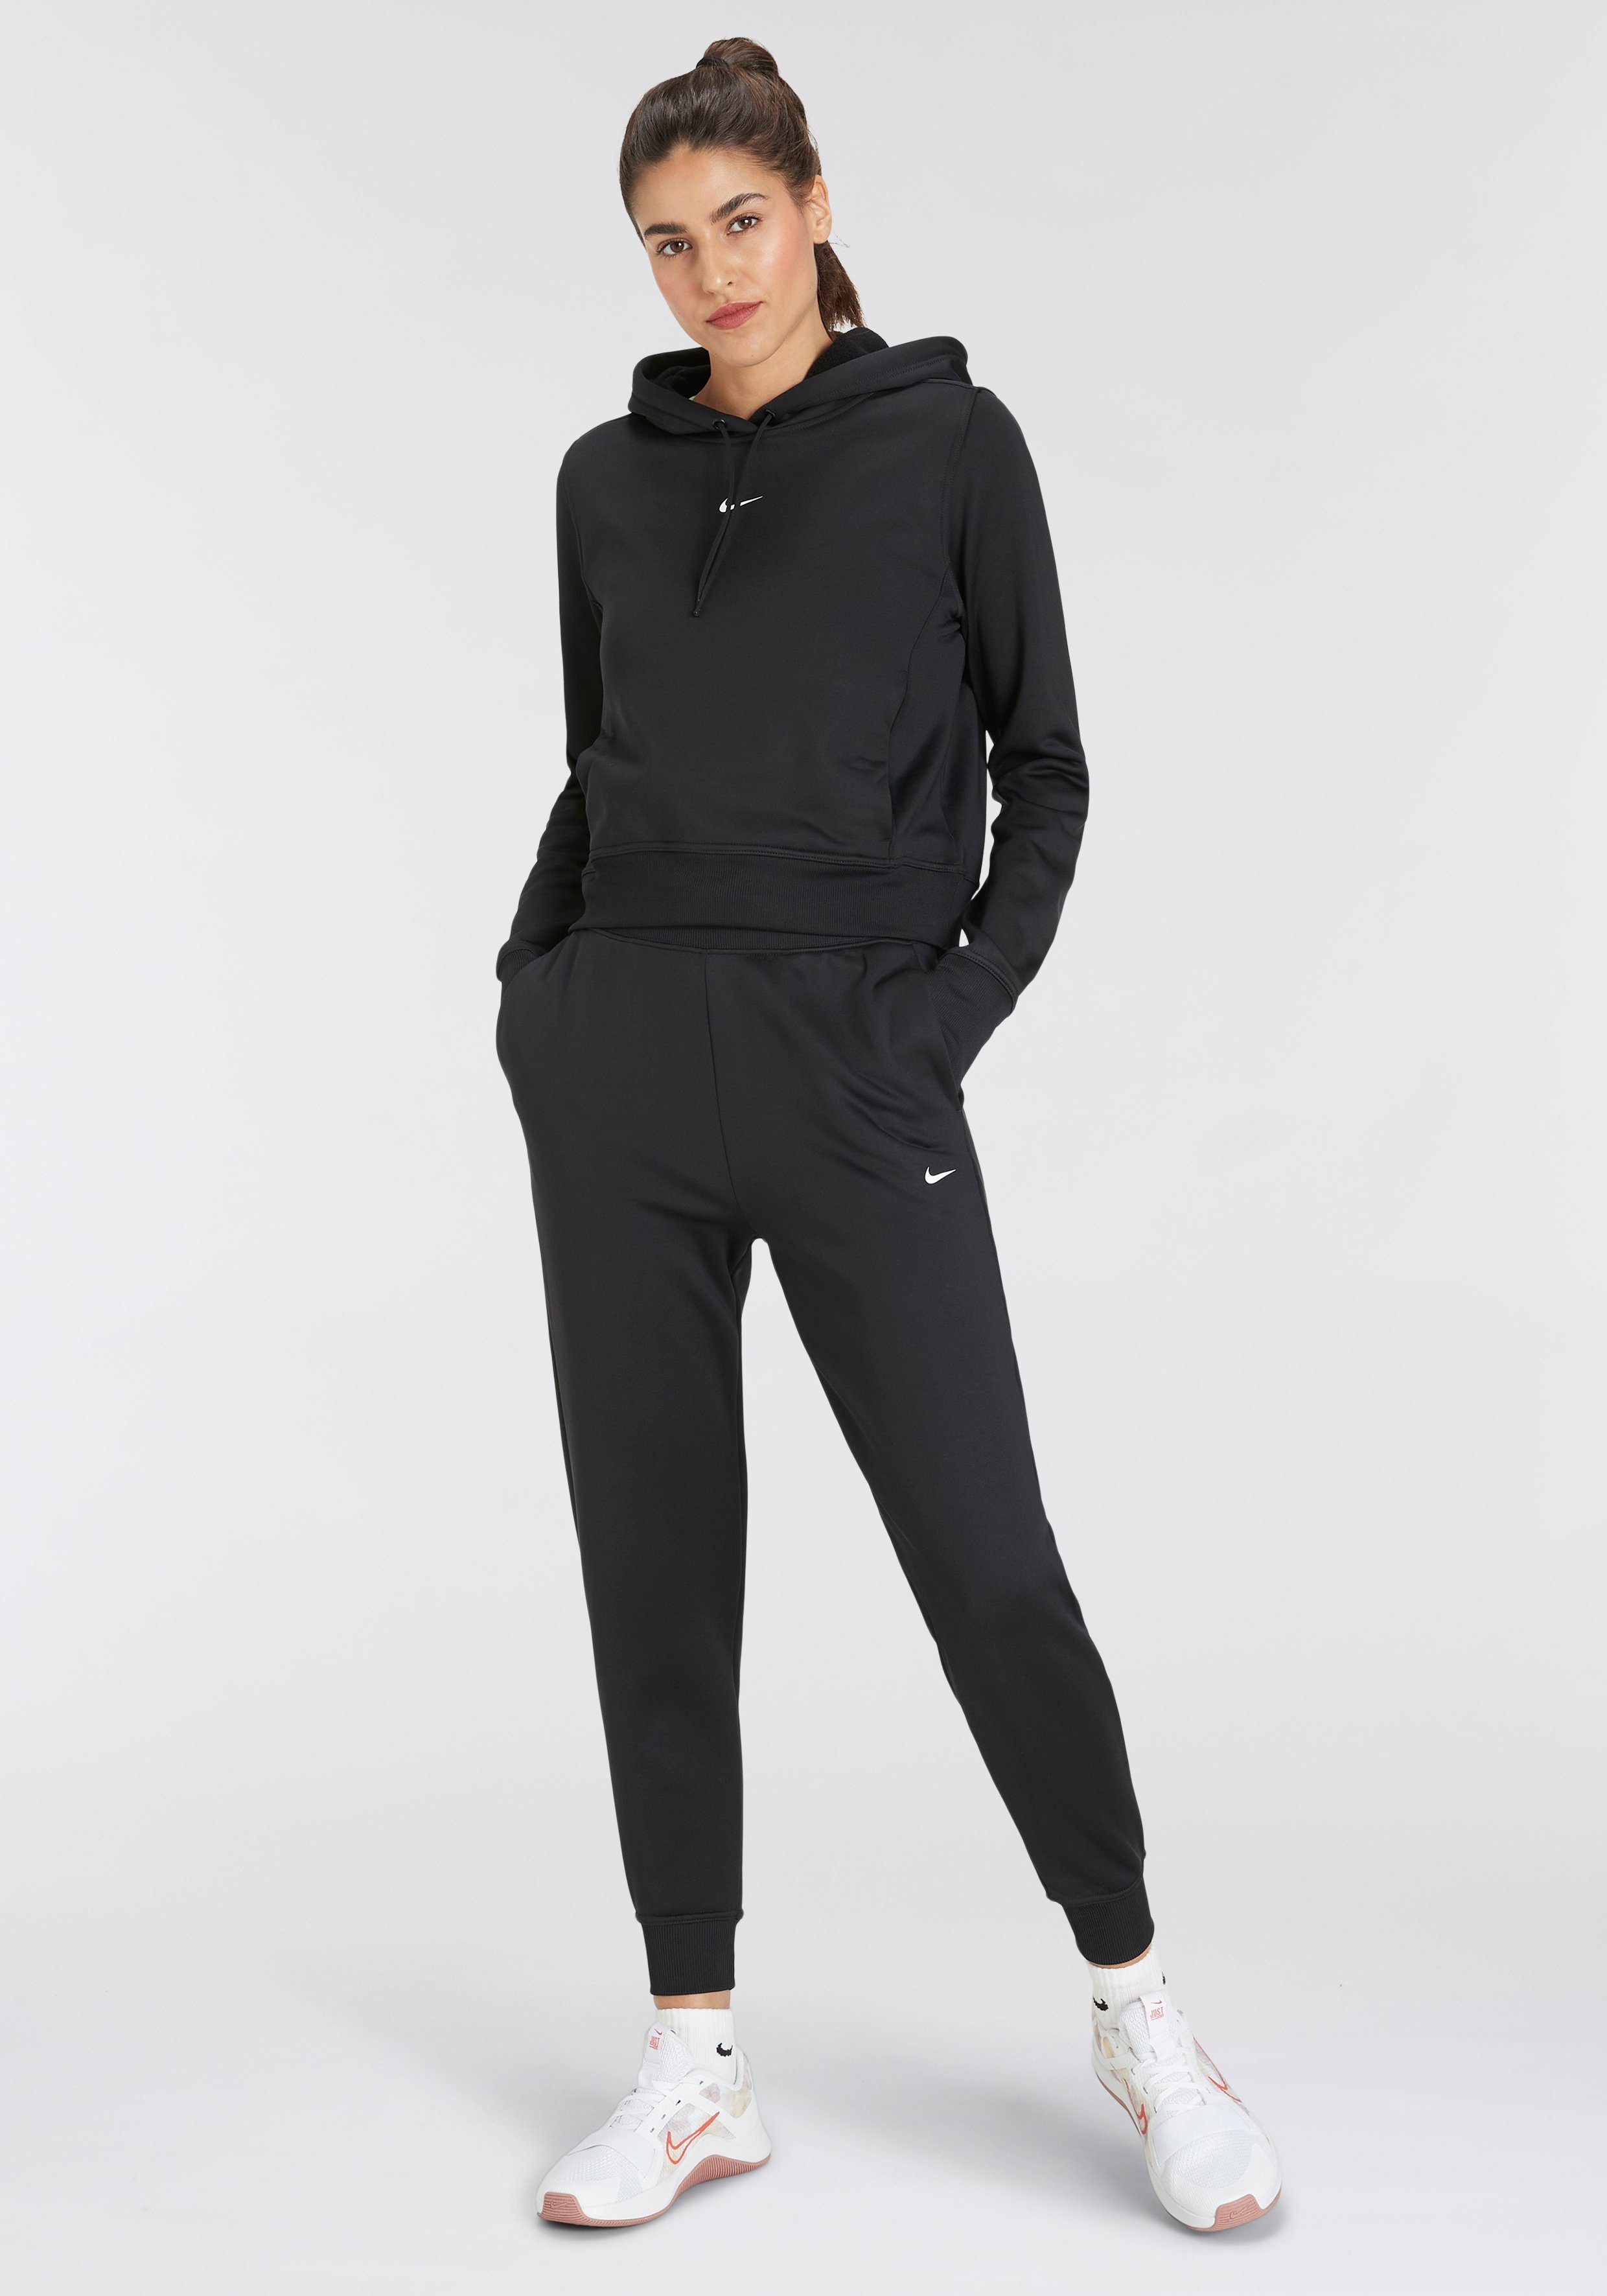 ONE WOMEN'S JOGGERS Trainingshose Nike THERMA-FIT